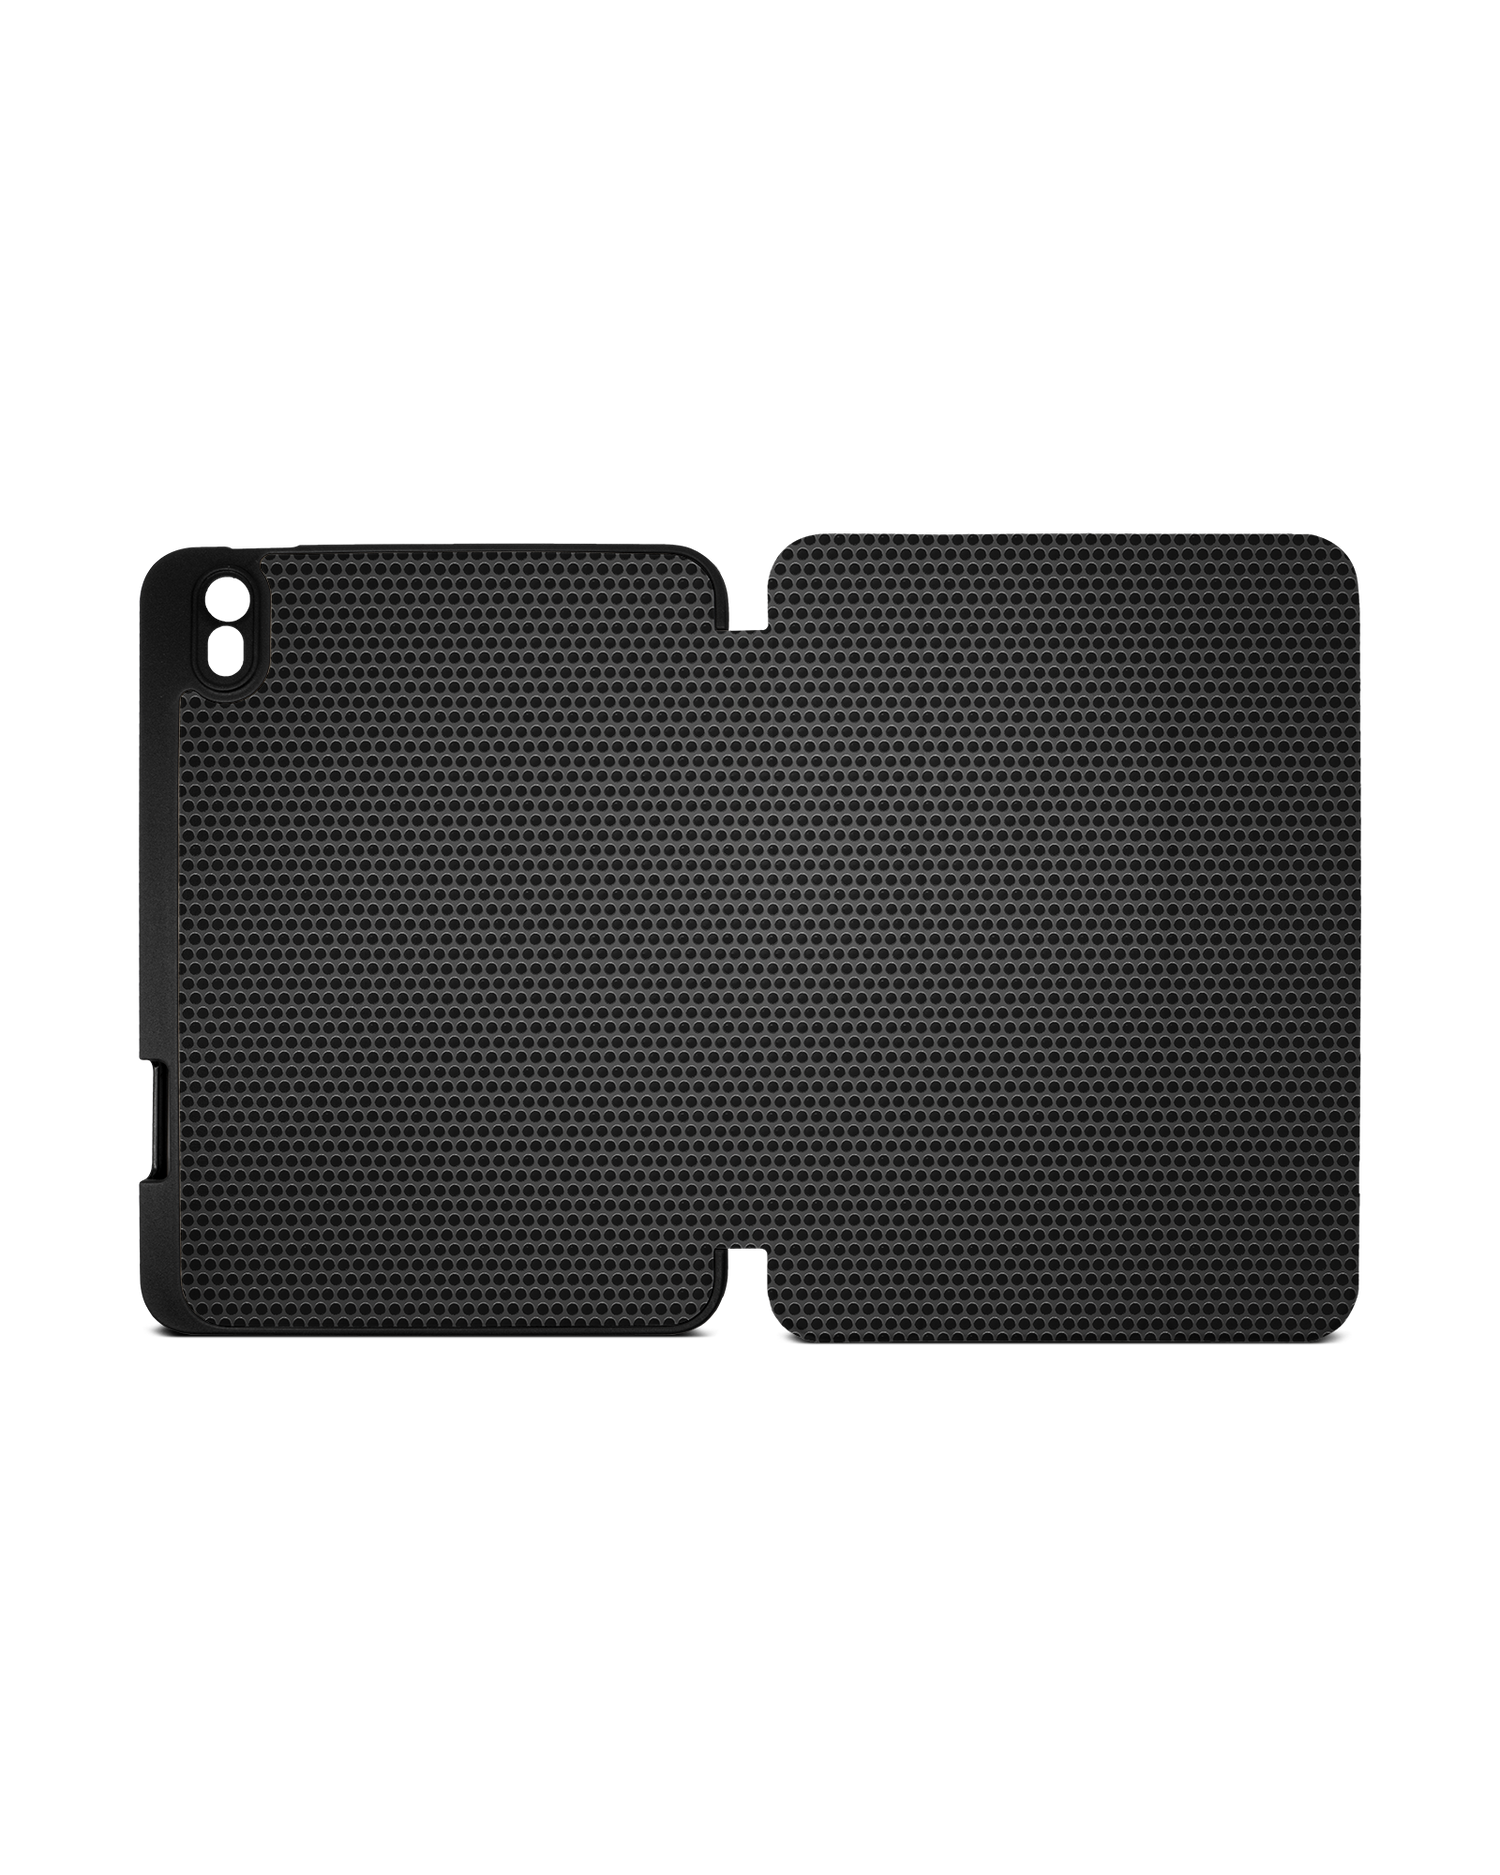 Carbon II iPad Case with Pencil Holder Apple iPad mini 6 (2021): Opened exterior view